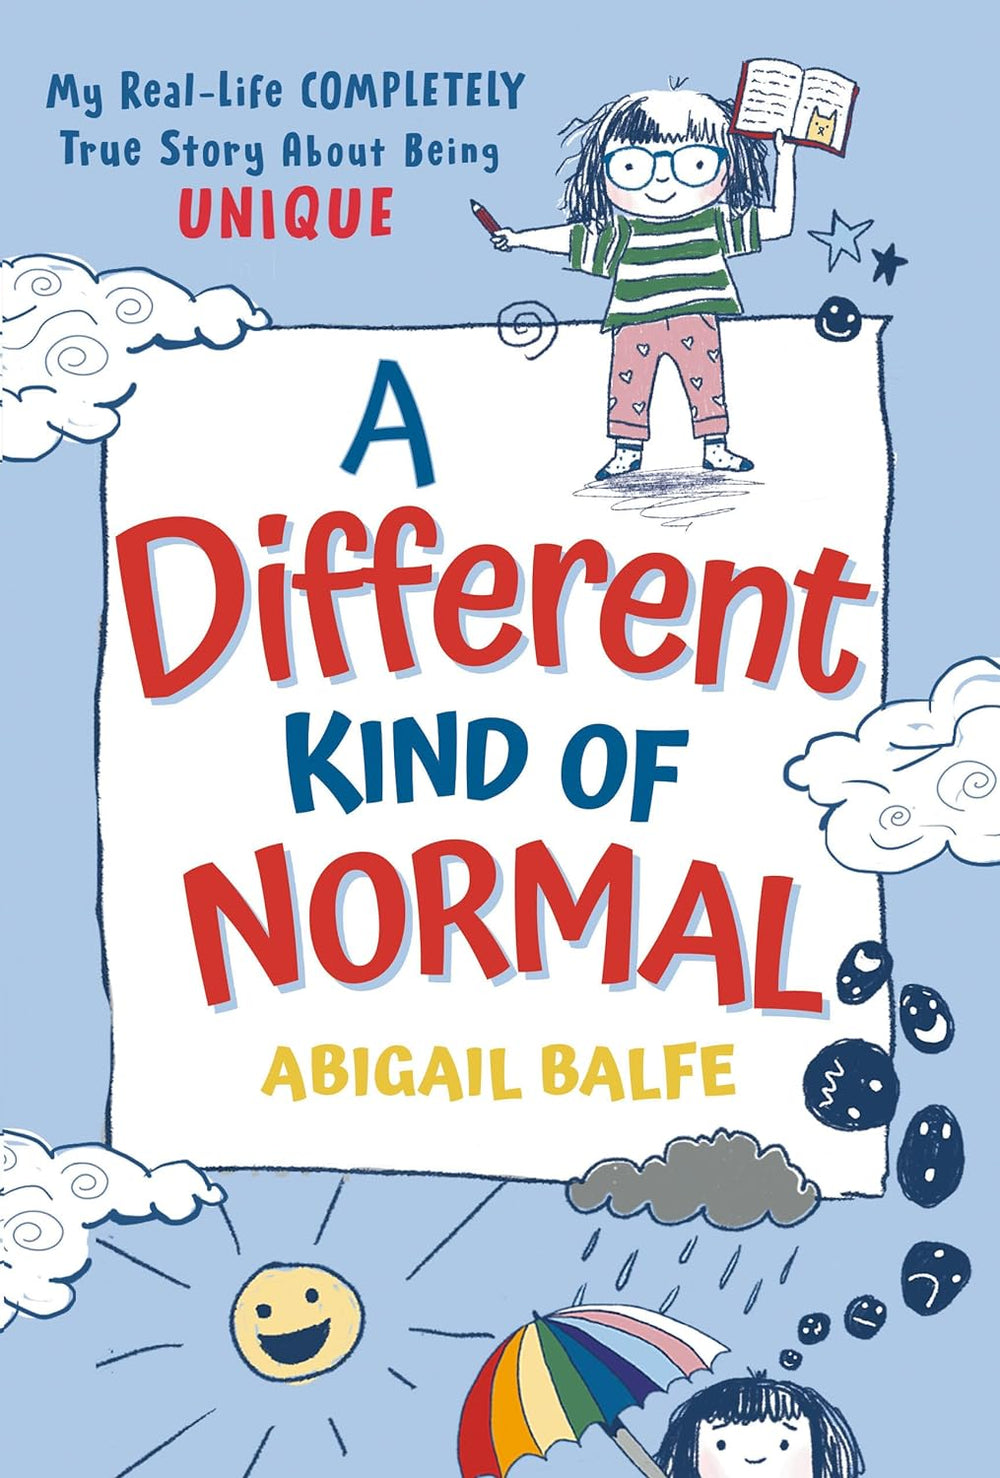 A Different Kind of Normal: My Real-Life Completely True Story About Being Unique.